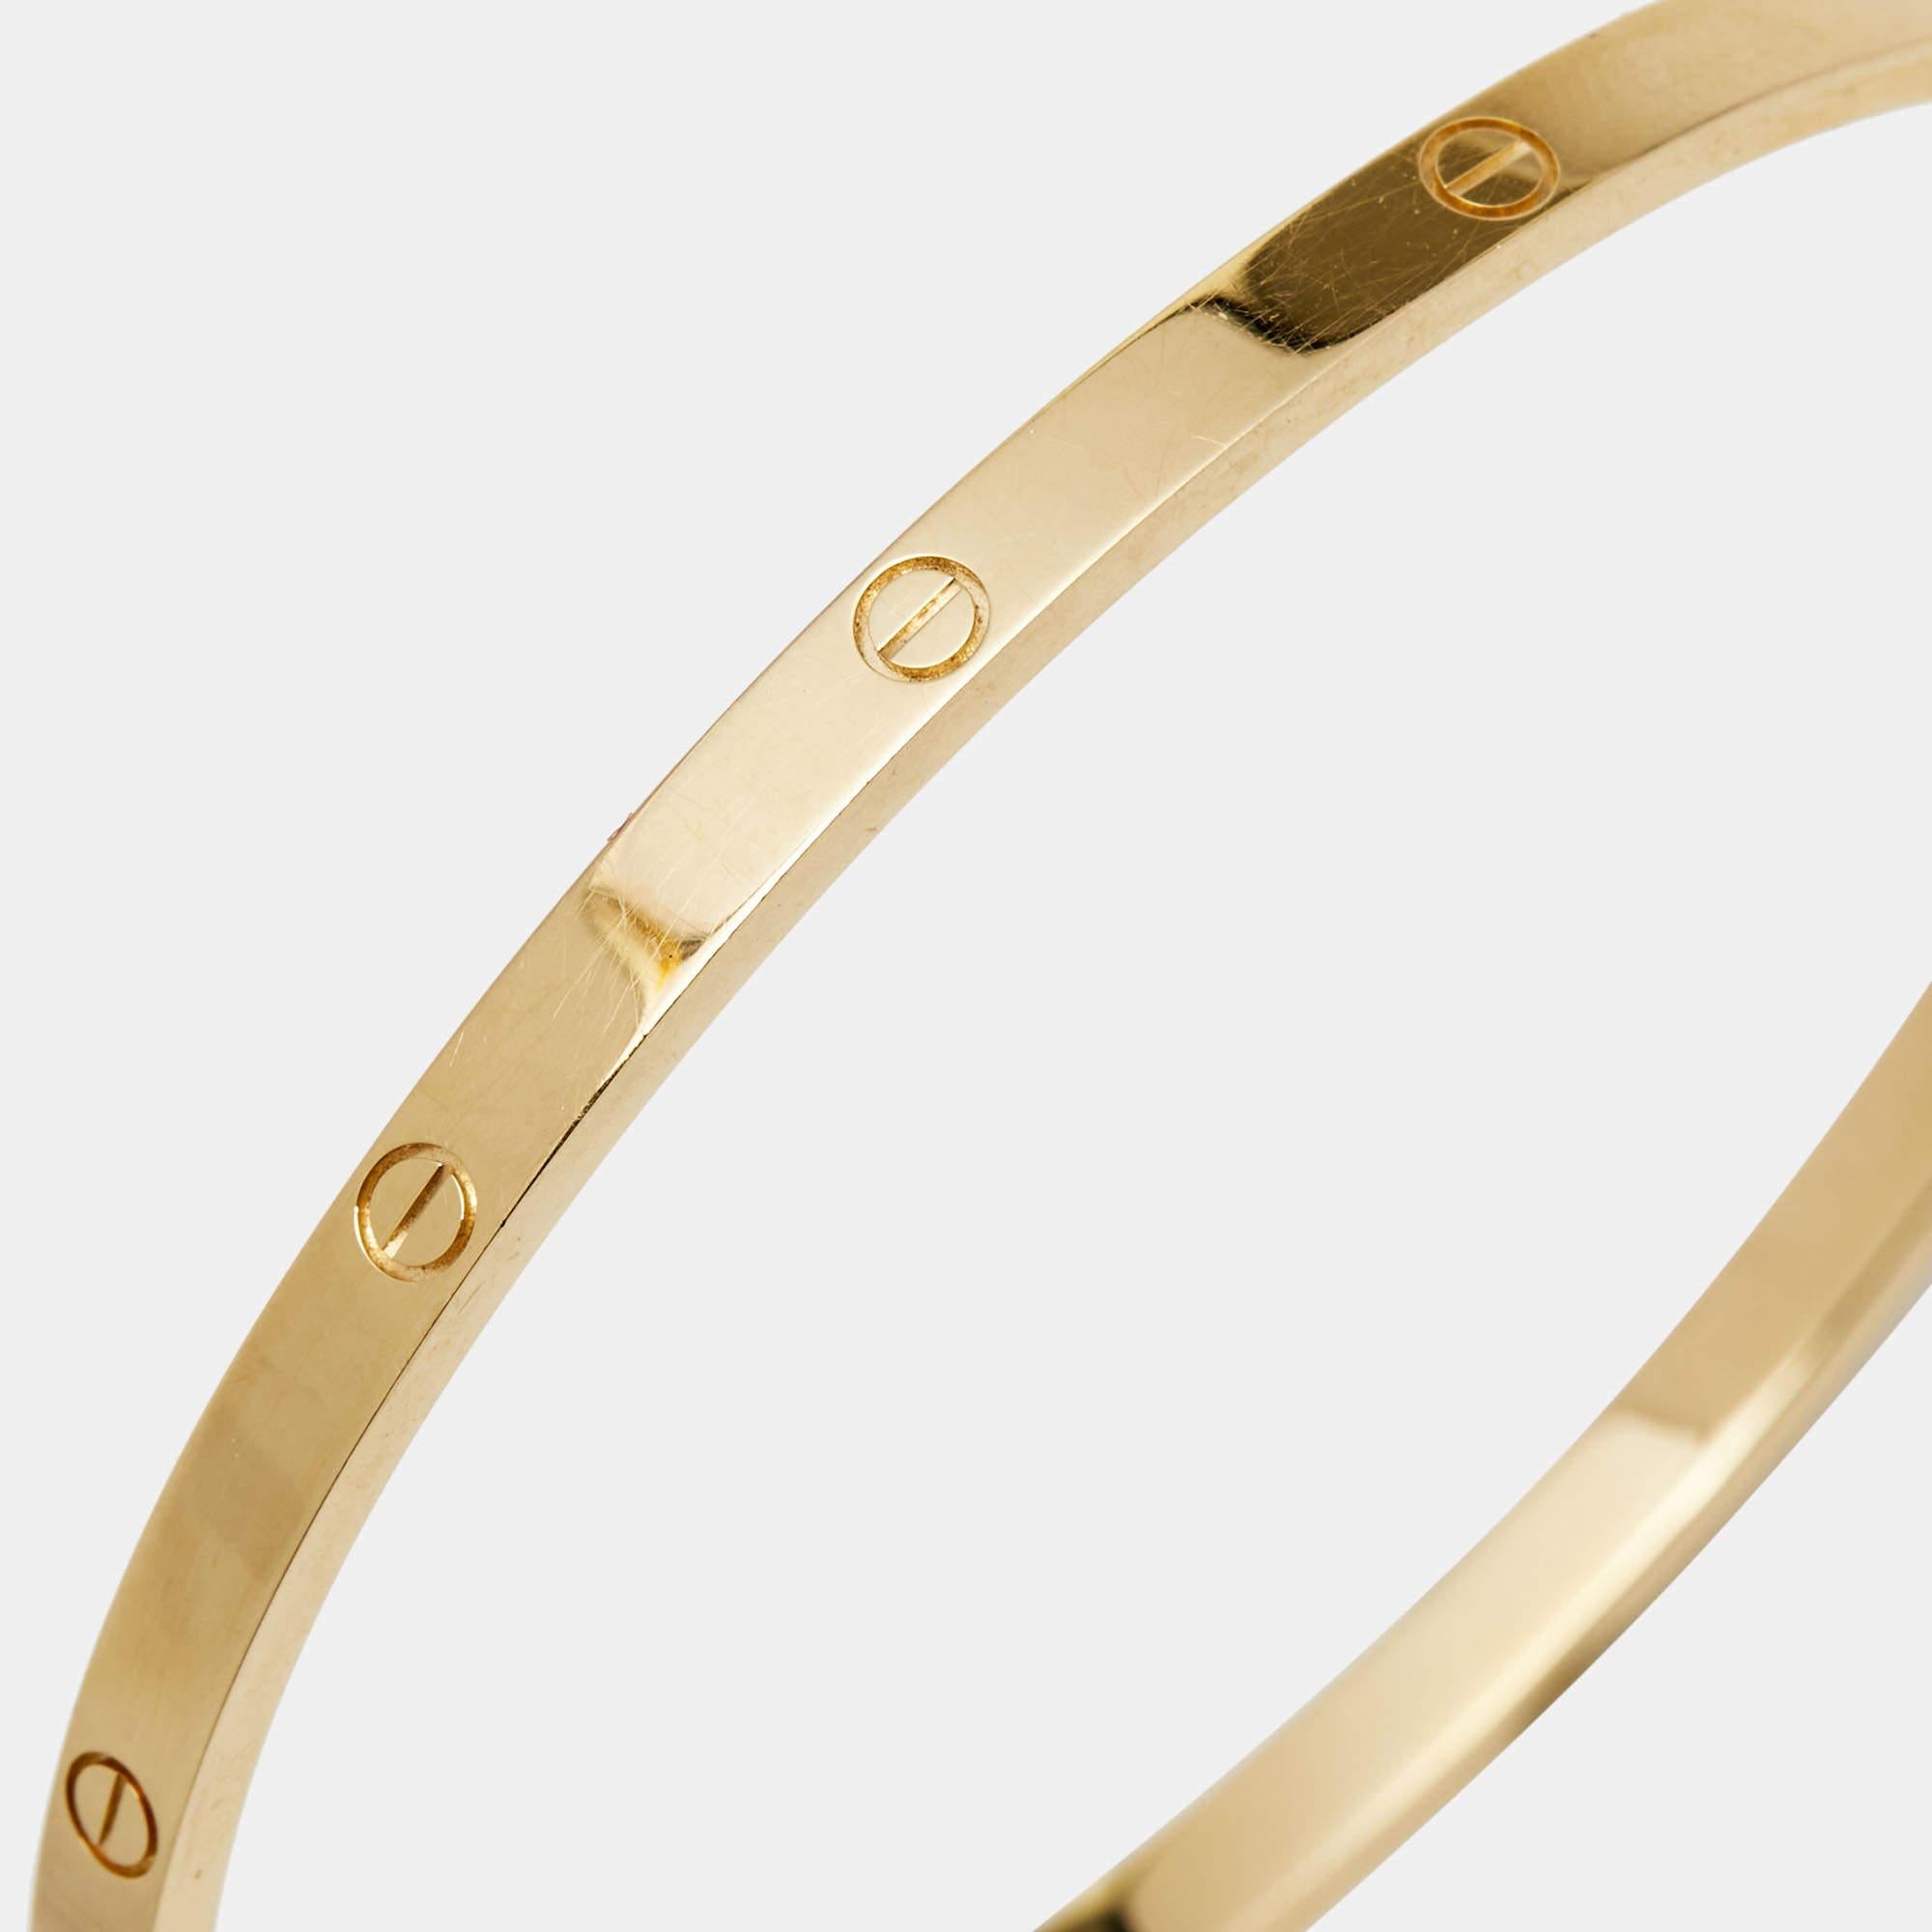 We fell in love with this Cartier Love bracelet at first glance. Look at its gorgeous yet subtle accents and picture how it will beautifully sit on your wrist and charm your peers. The creation is crafted from 18k Yellow Gold and neatly detailed